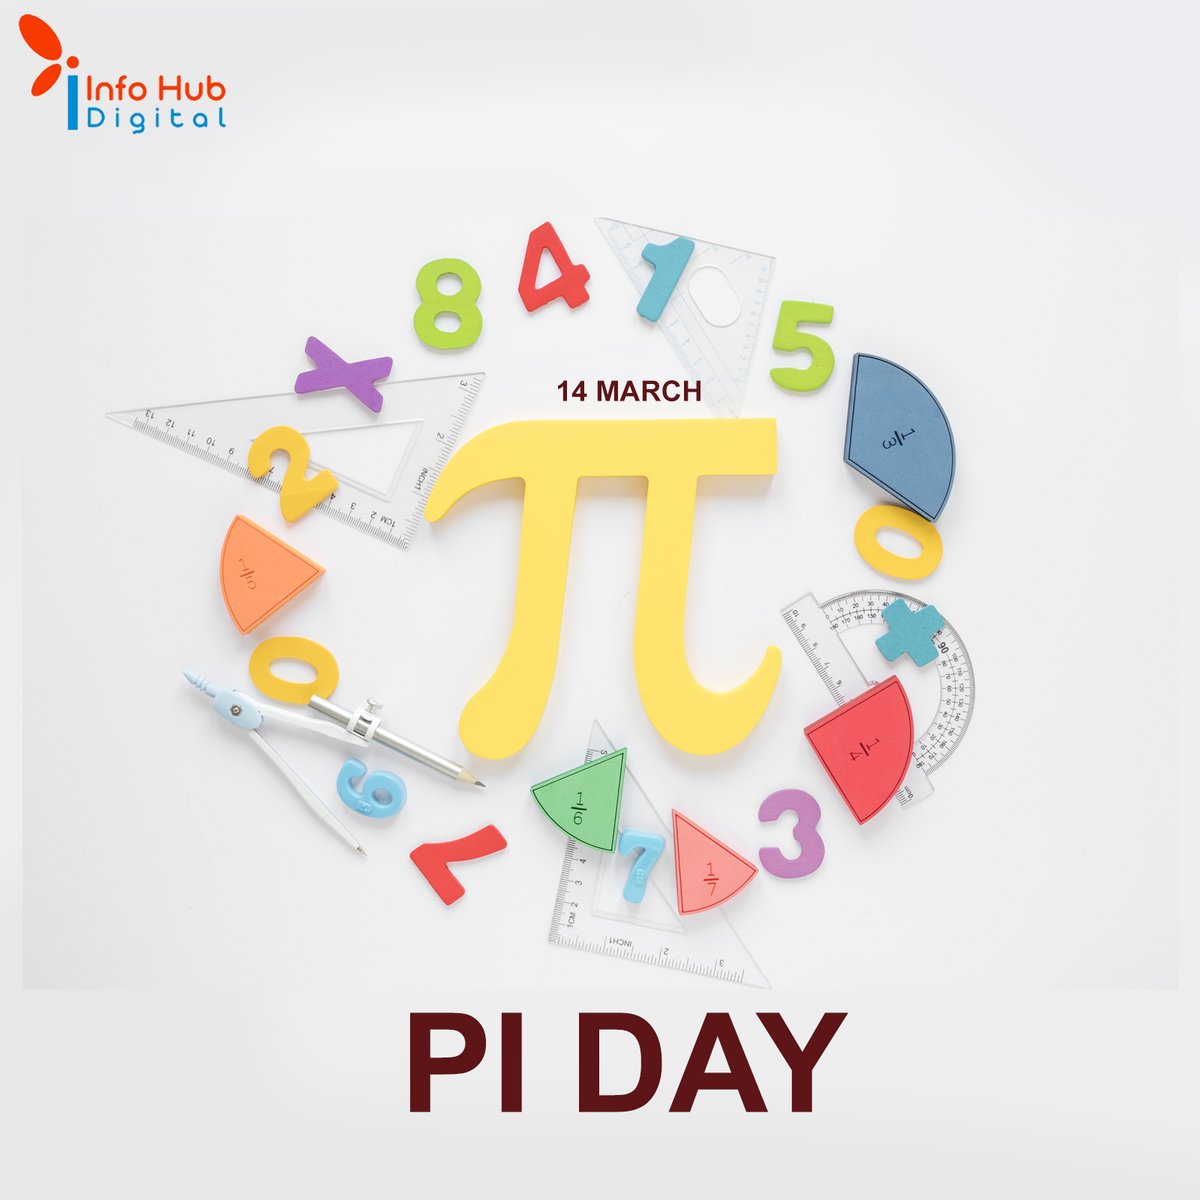 Happy Pi Day! Let's celebrate the magic of π, where numbers never end and circles never cease. 

#PiDay #Mathematics #CelebratePi #InfiniteWonders #infohubdigital